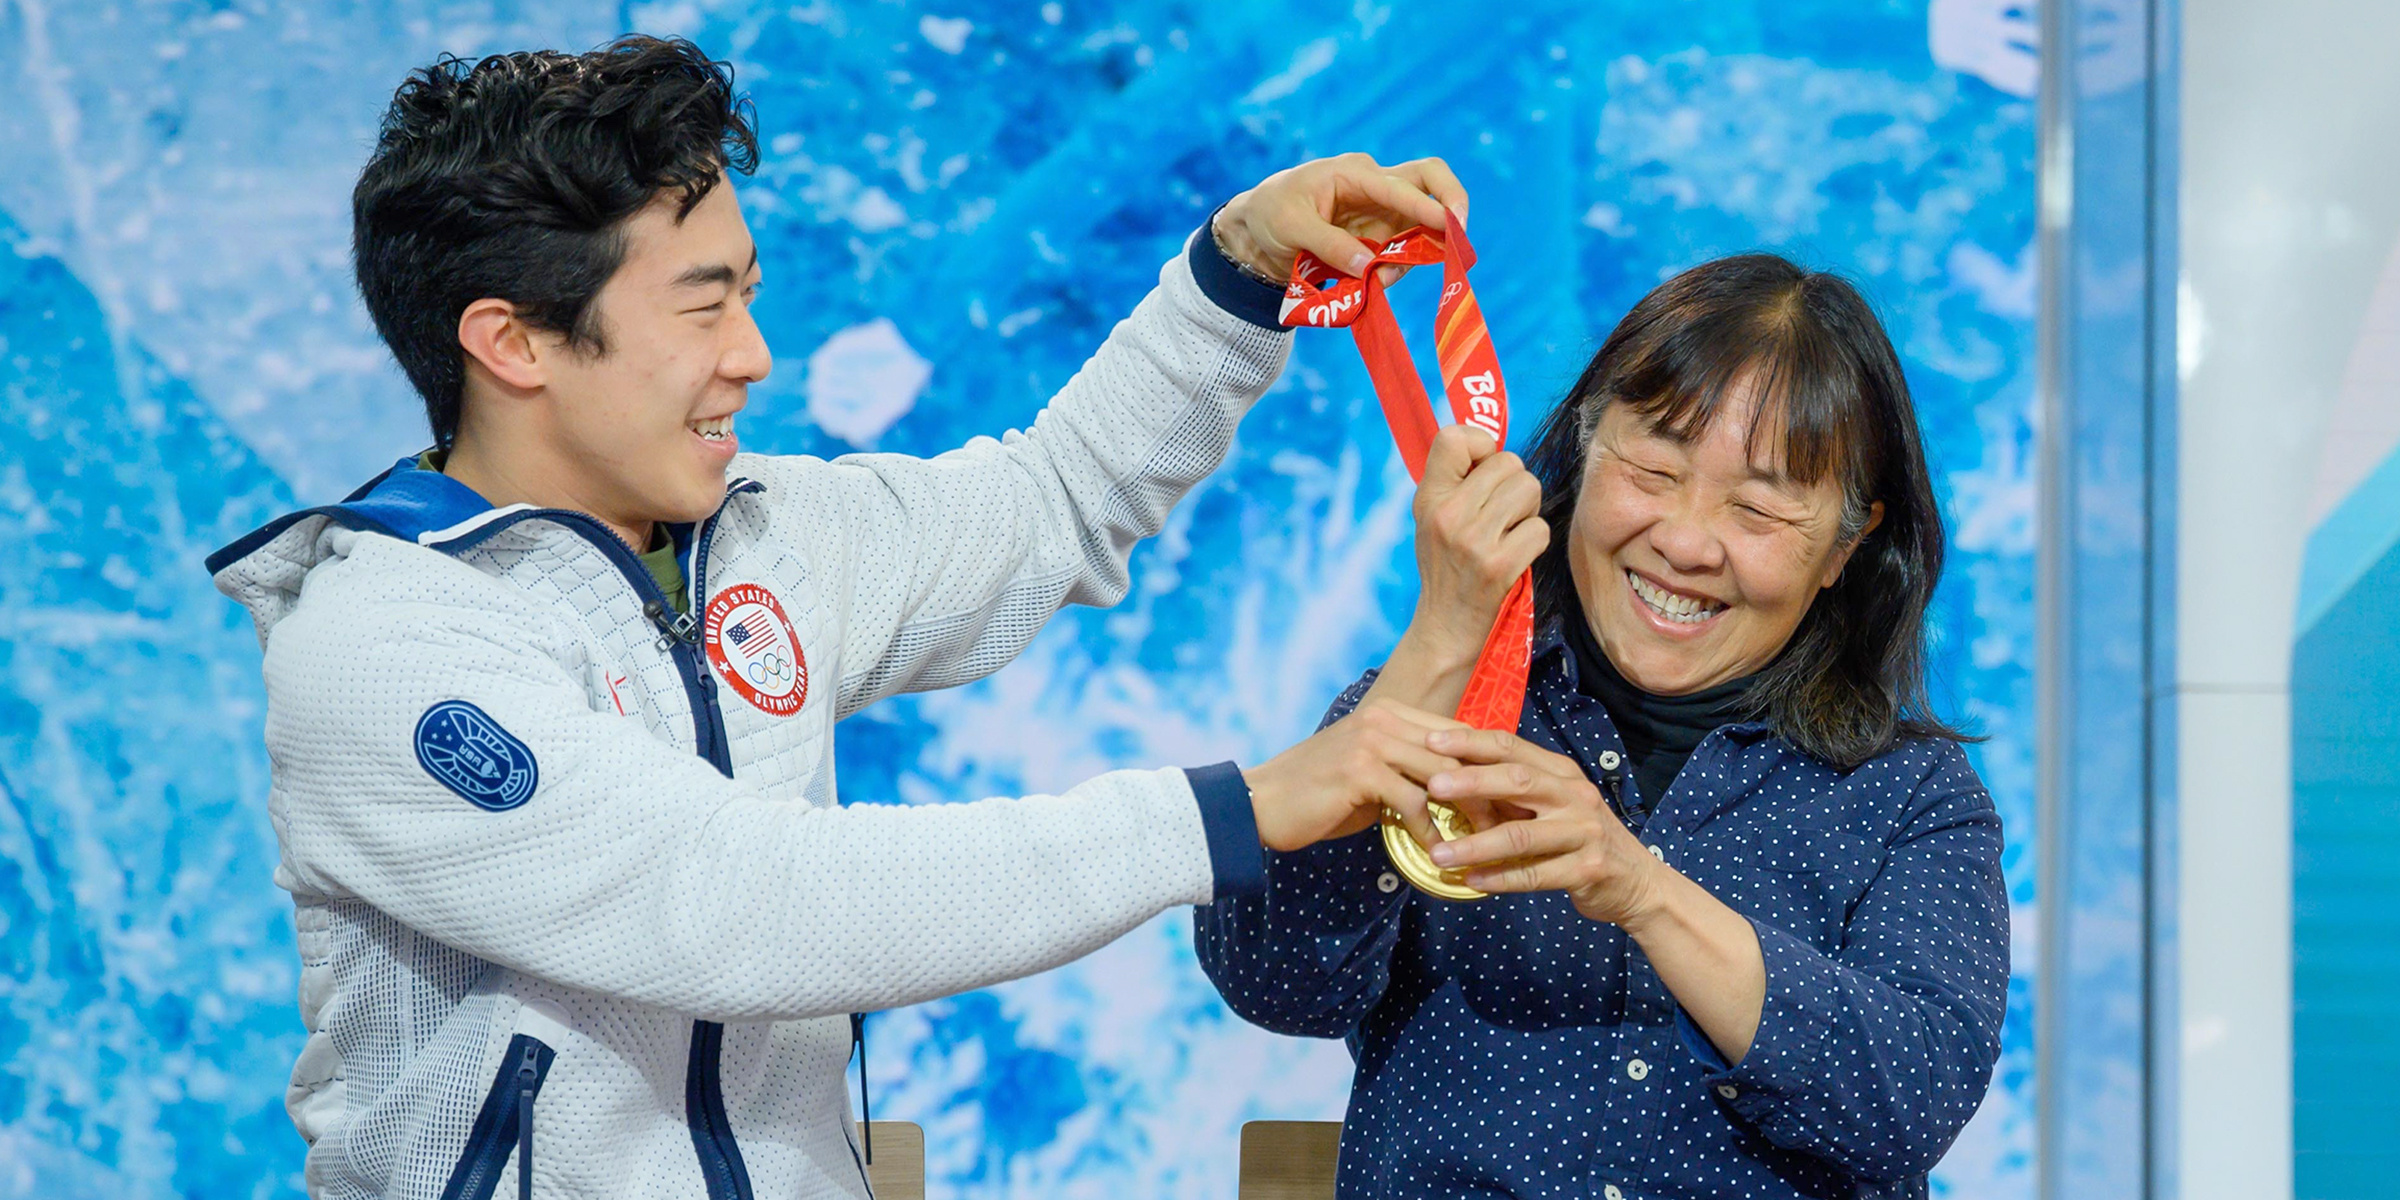 Nathan Chen, Gold medal surprise, Touching moment, Sports, 2400x1200 Dual Screen Desktop